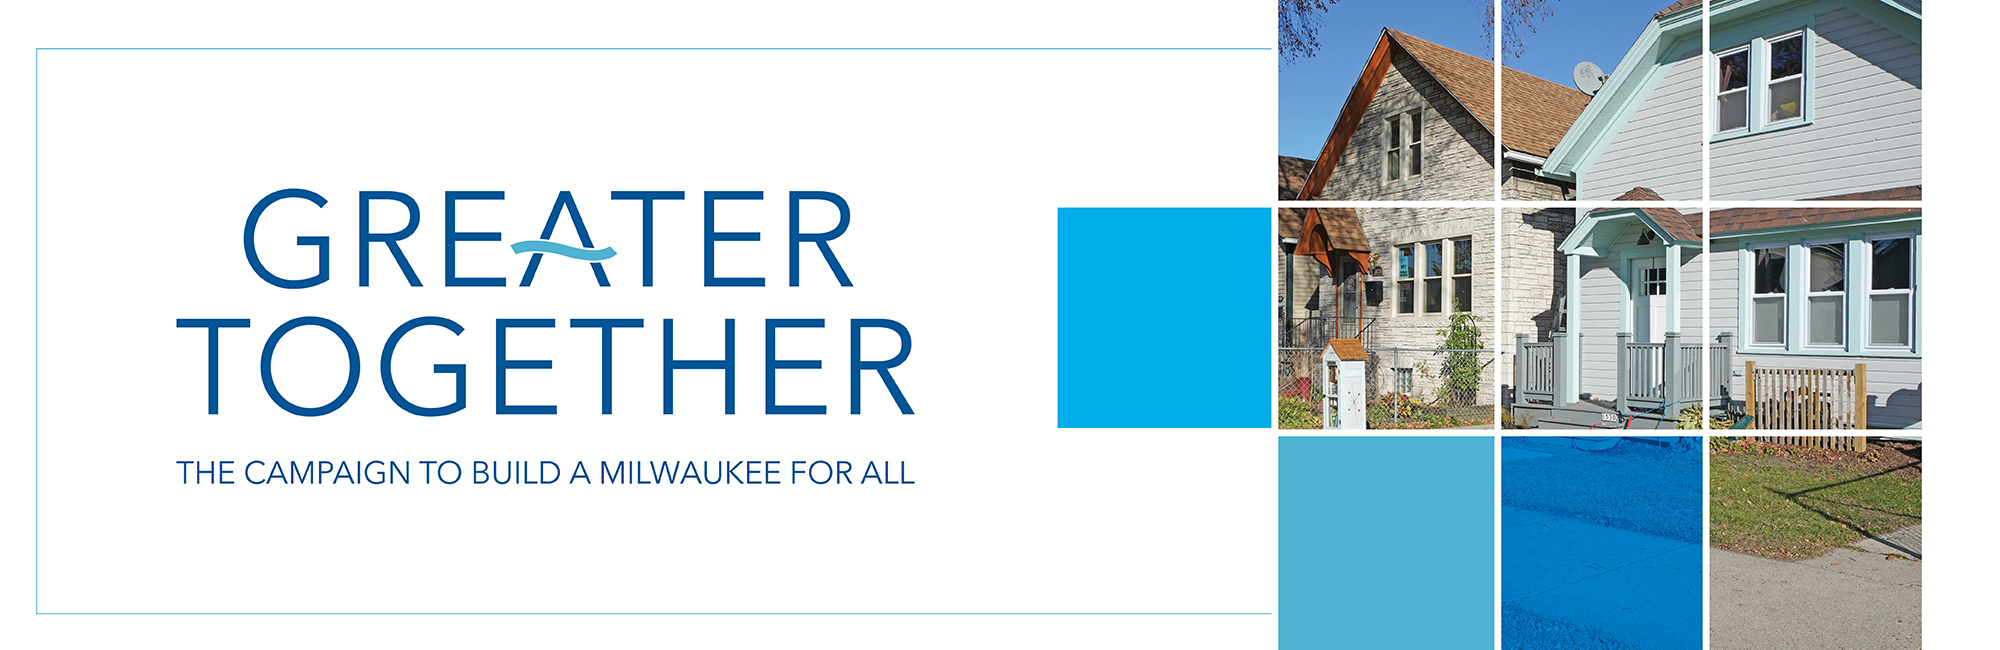 Greater Together Campaign banner featuring housing